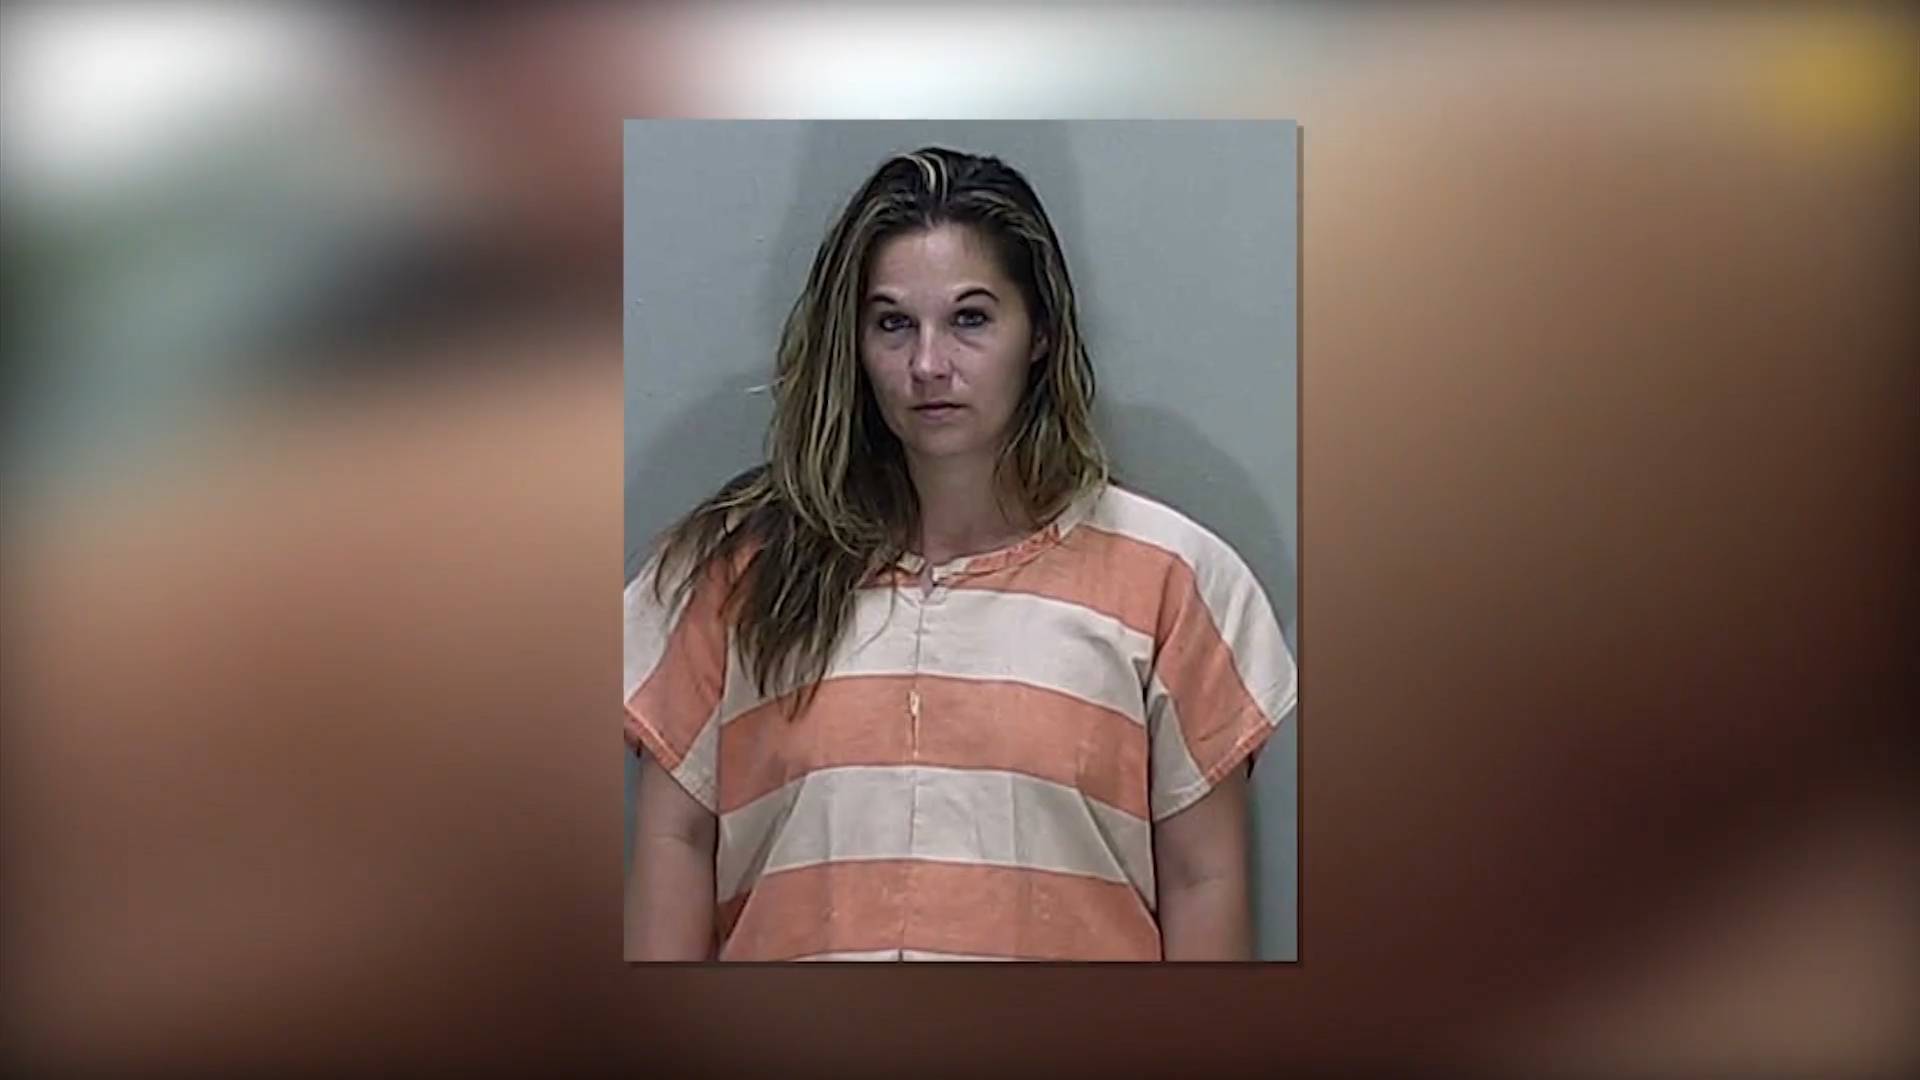 Woman, 30, is arrested for neglecting her young siblings, ages 2-9 who were found covered in sores and infested with lice.